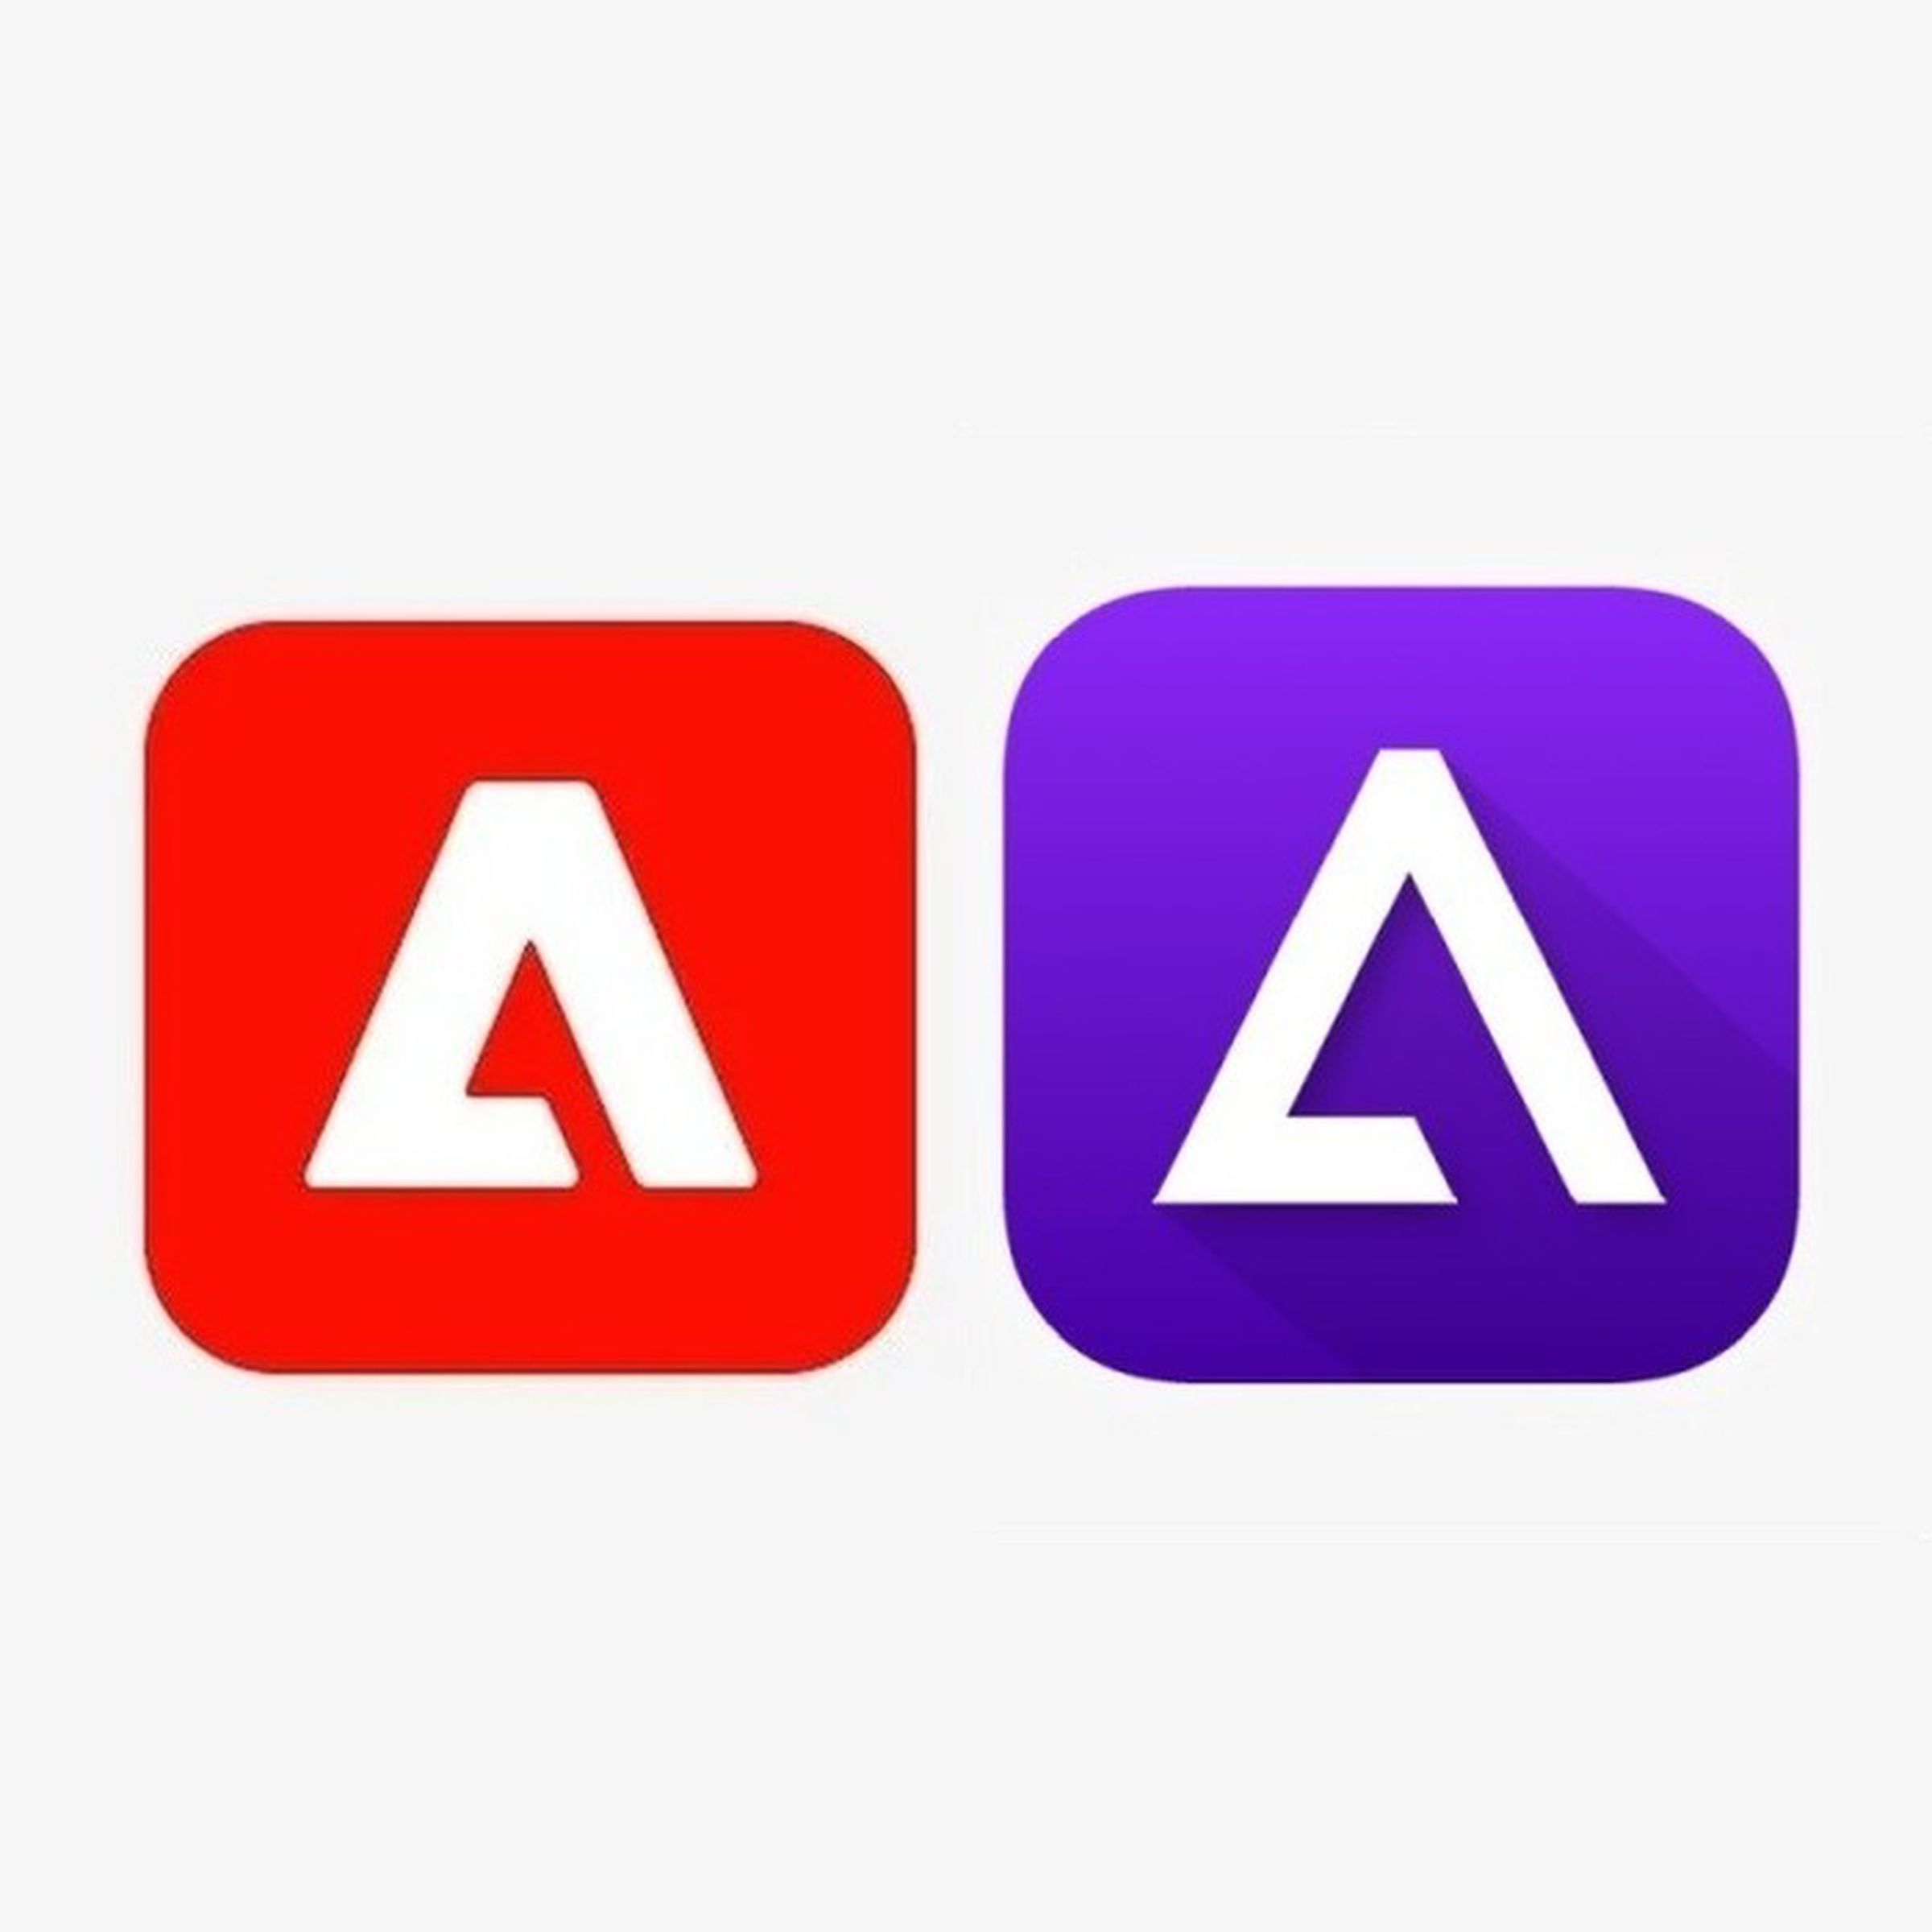 There’s no denying the similarities to Adobe’s Experience Cloud logo (left), but Adobe typically uses a negative space logo that’s harder to mistake.